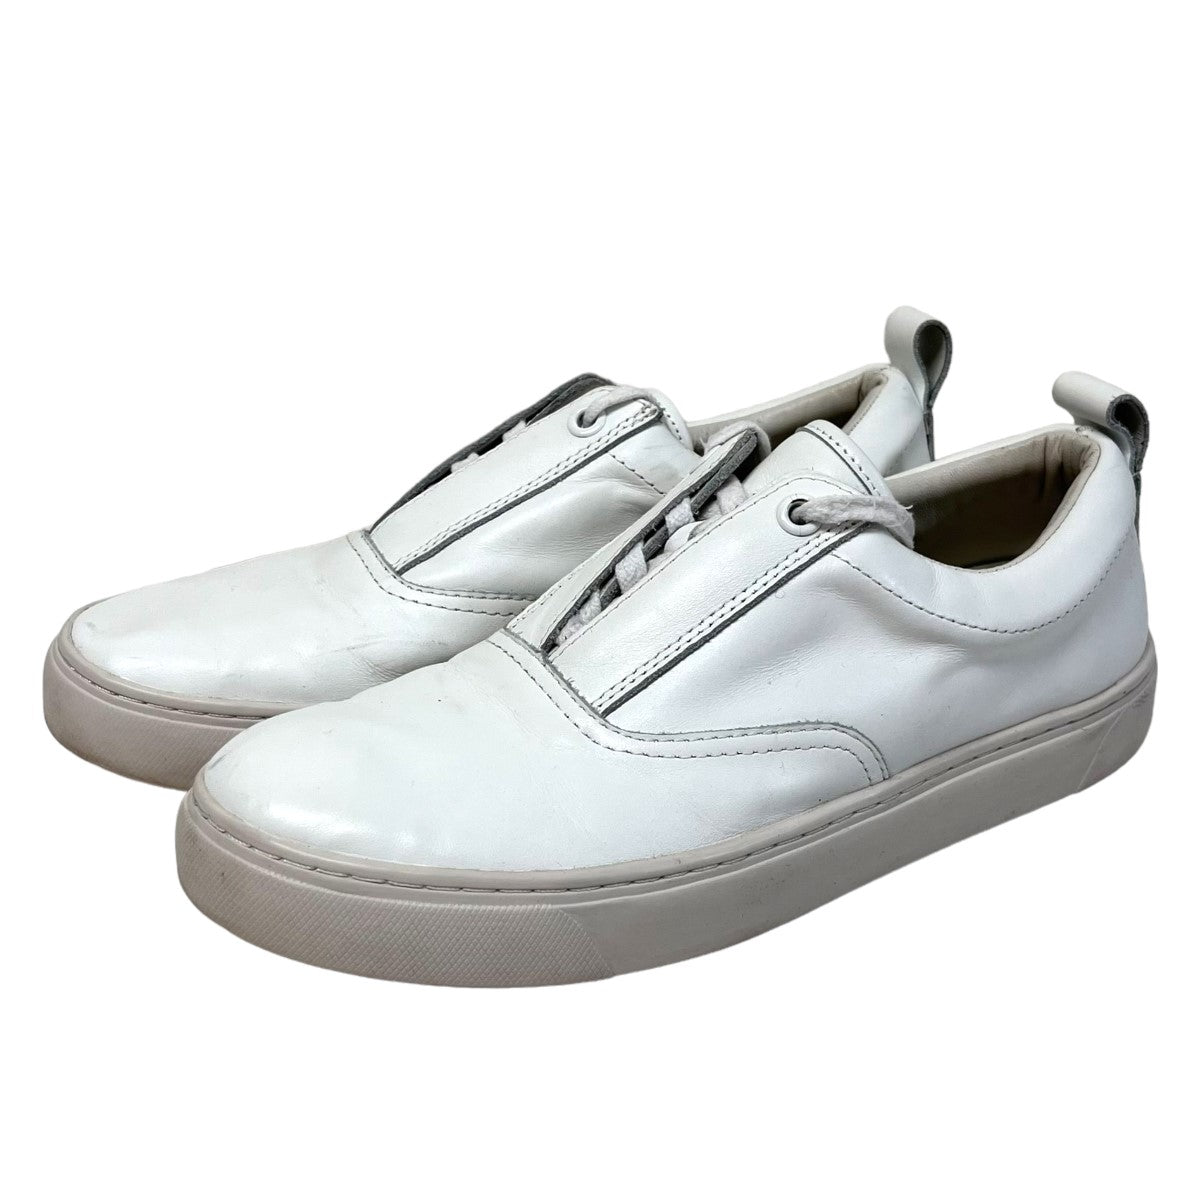 COOTIE(クーティー) Raza Lace Up Shoes レースアップスニーカー TM ...